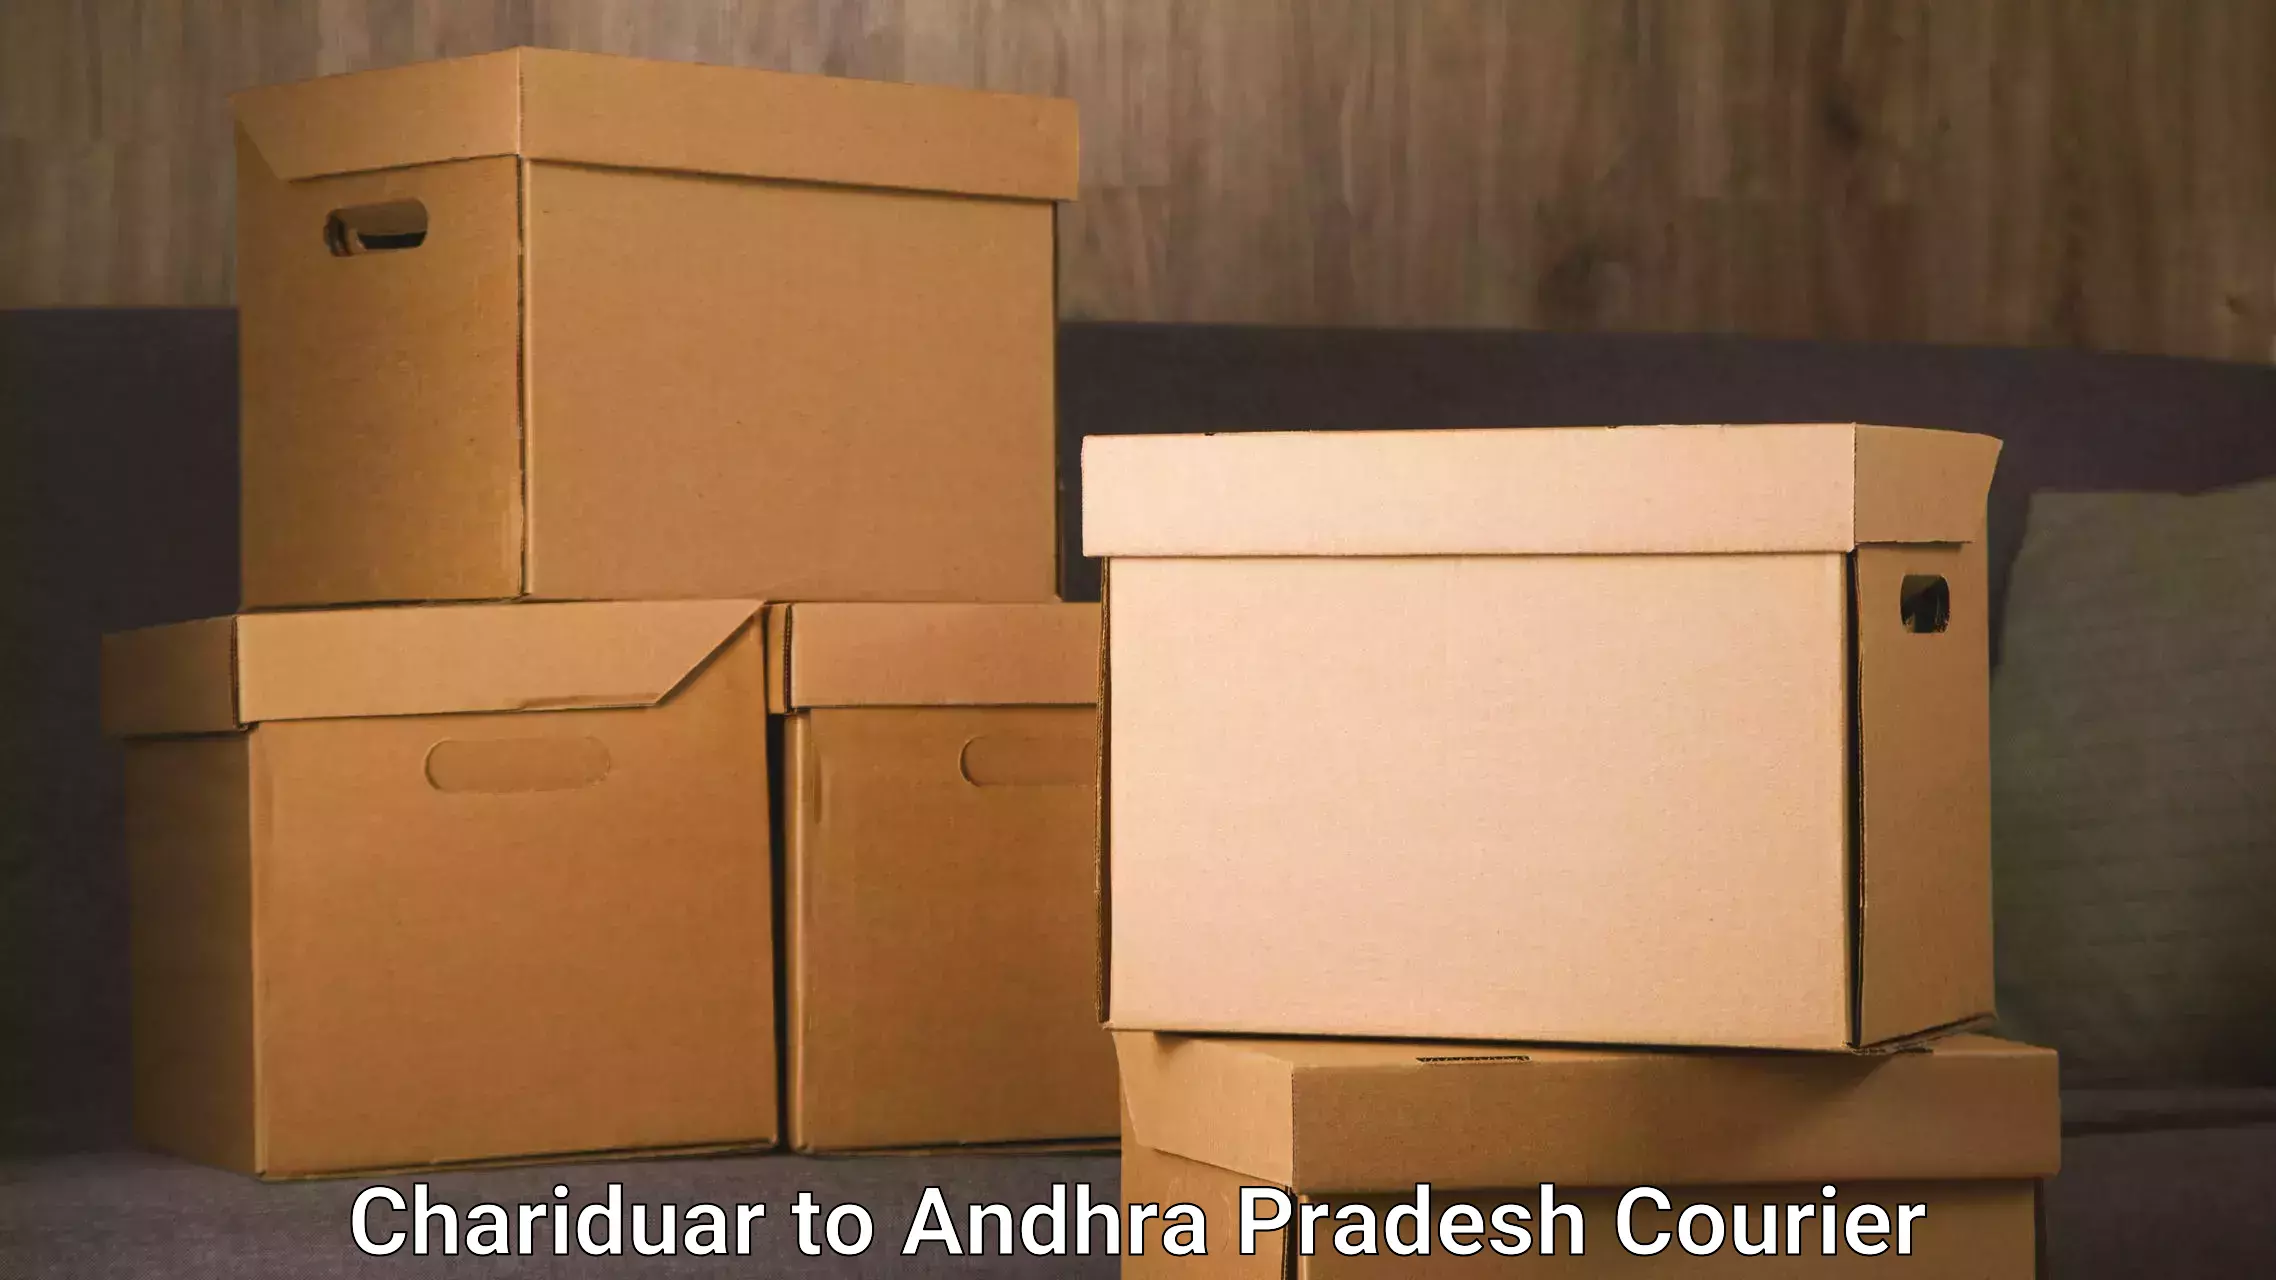 Round-the-clock parcel delivery Chariduar to Andhra Pradesh